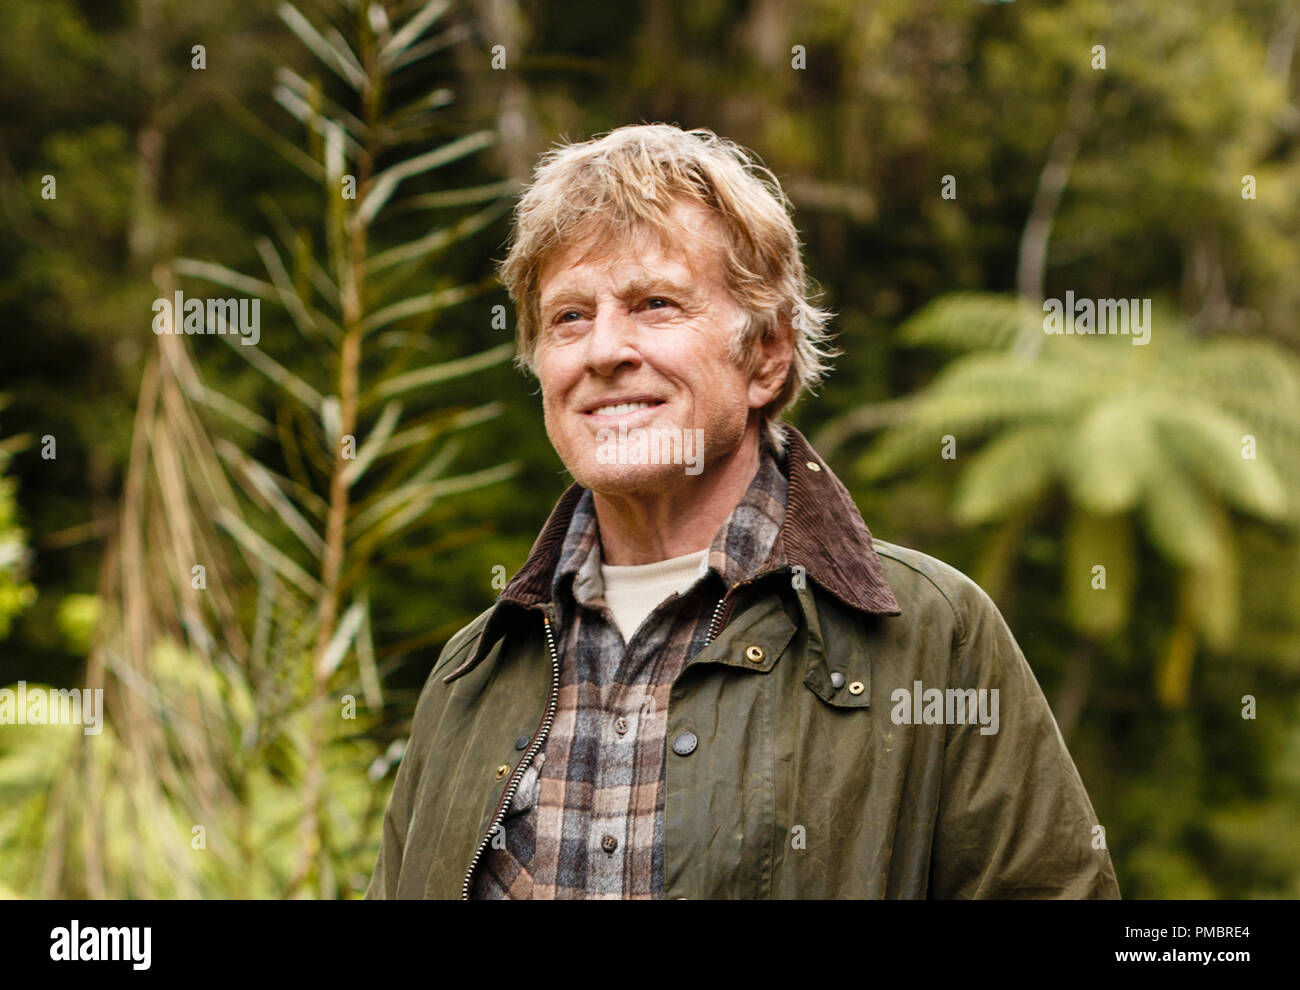 Robert Redford is Mr. Meacham, an old wood carver who delights local children with tales of the fierce dragon that resides deep in the woods nearby in Disney's PETE'S DRAGON. Stock Photo